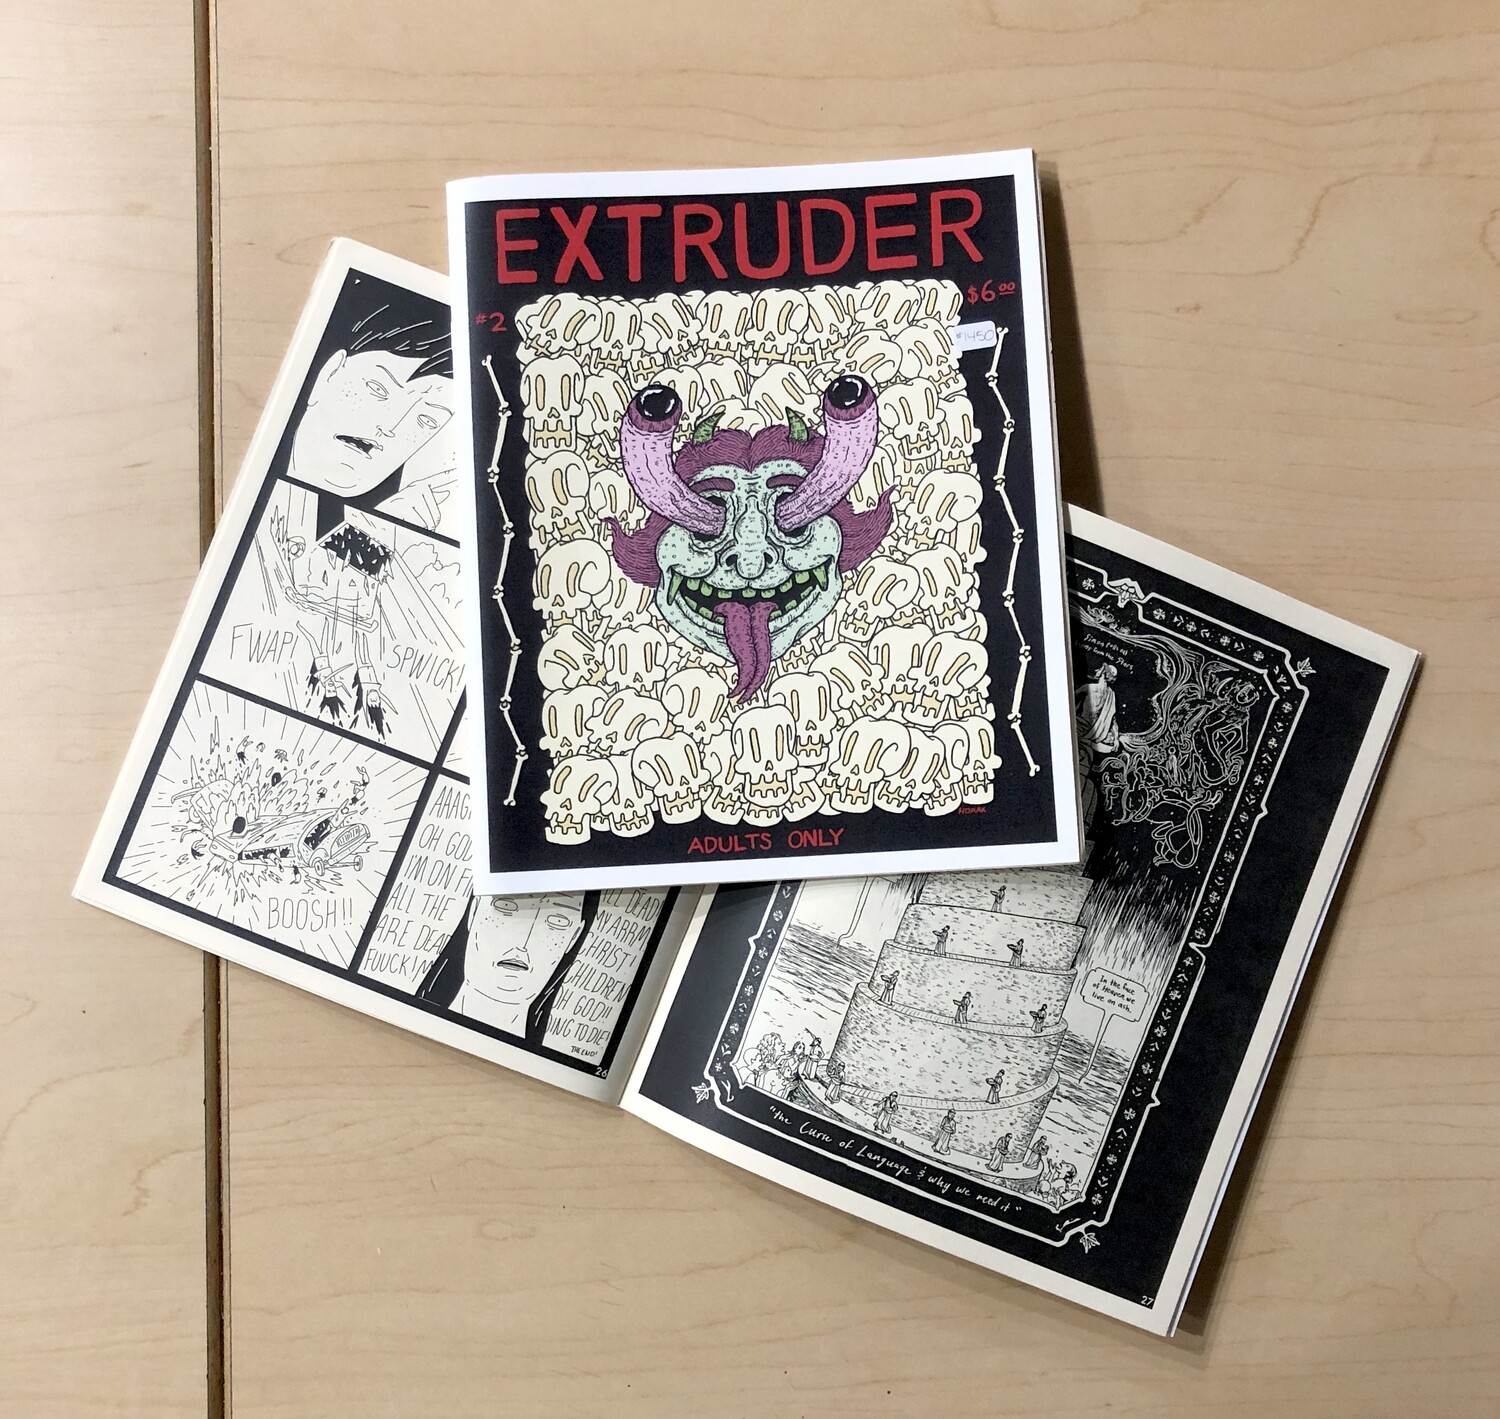 Extruder #2 - Comic featuring Seth Goodkind